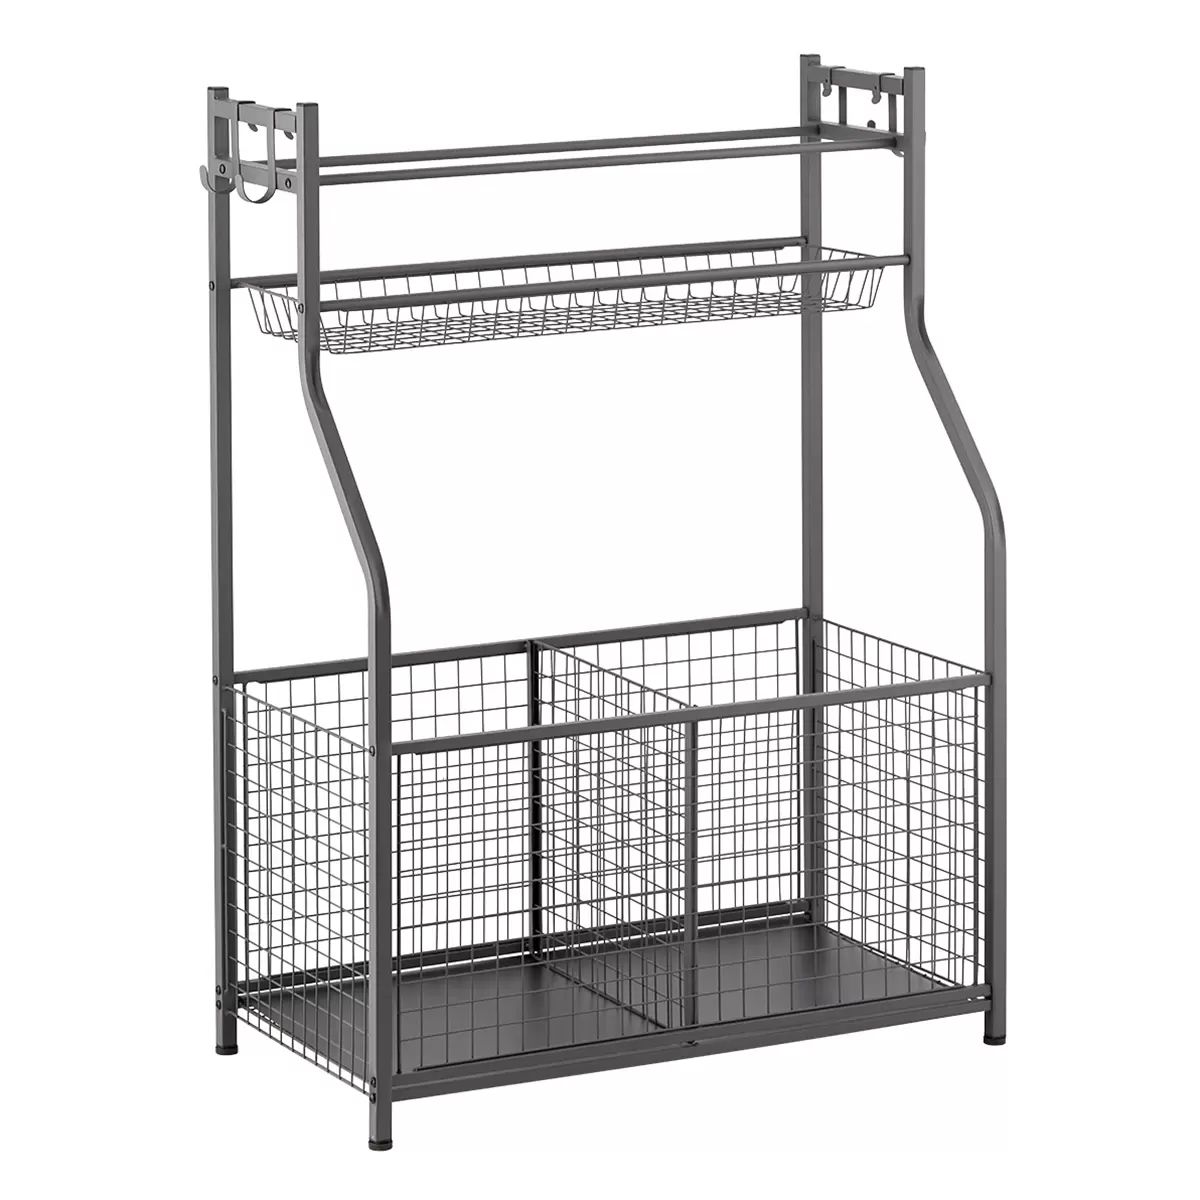 The Container Store Heavy-Duty Sports Storage Rack | The Container Store